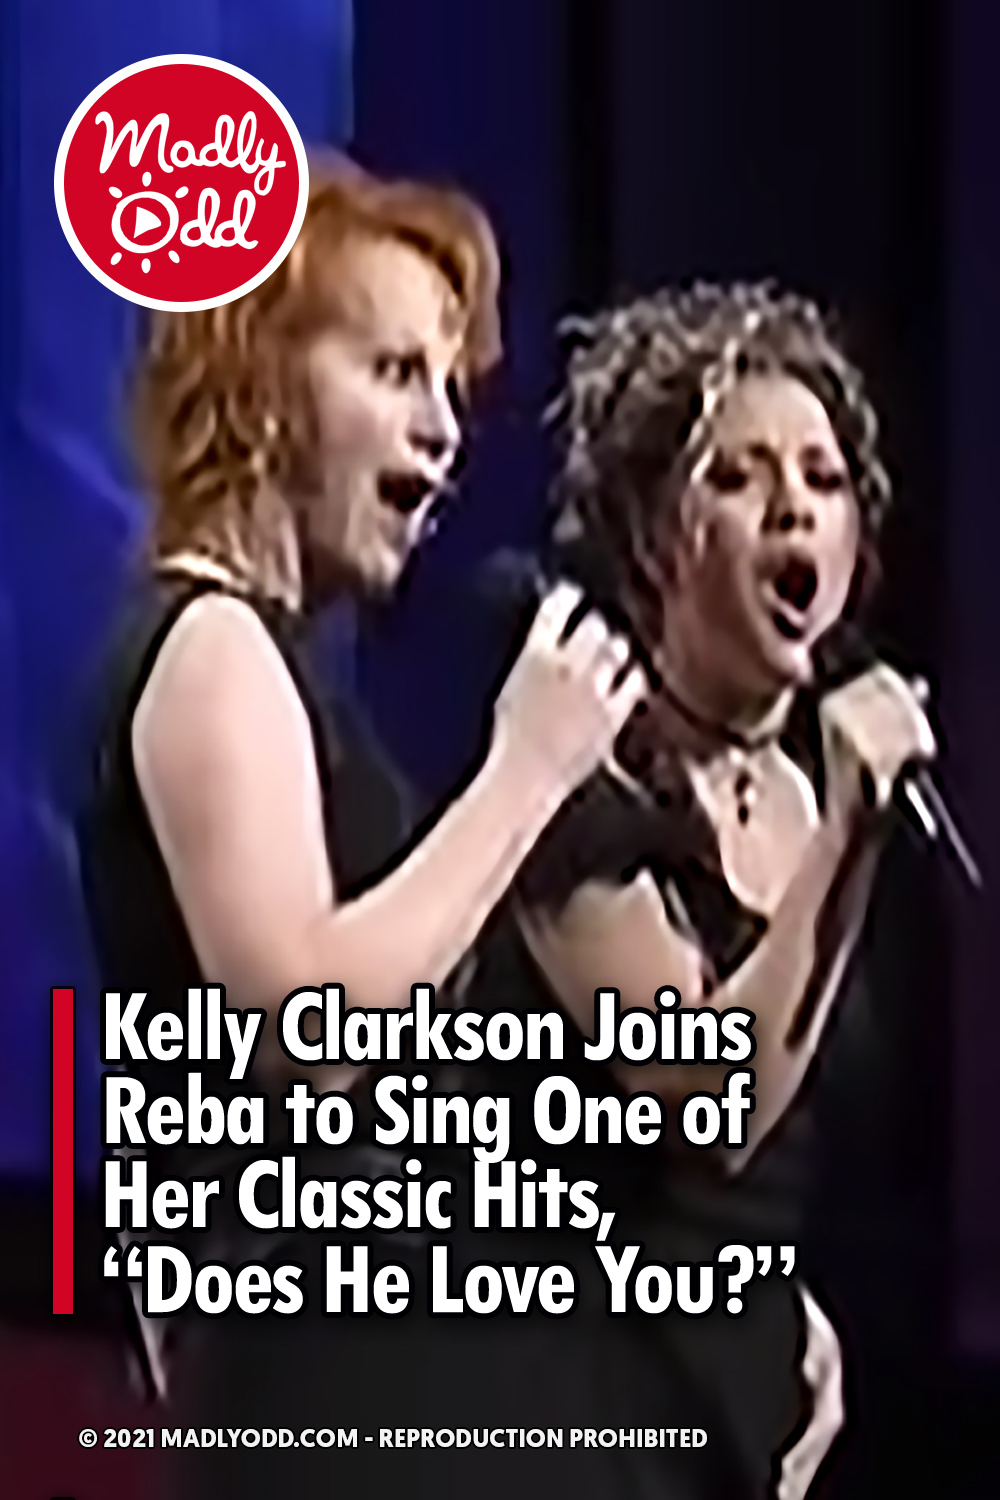 Kelly Clarkson Joins Reba to Sing One of Her Classic Hits, “Does He Love You?”